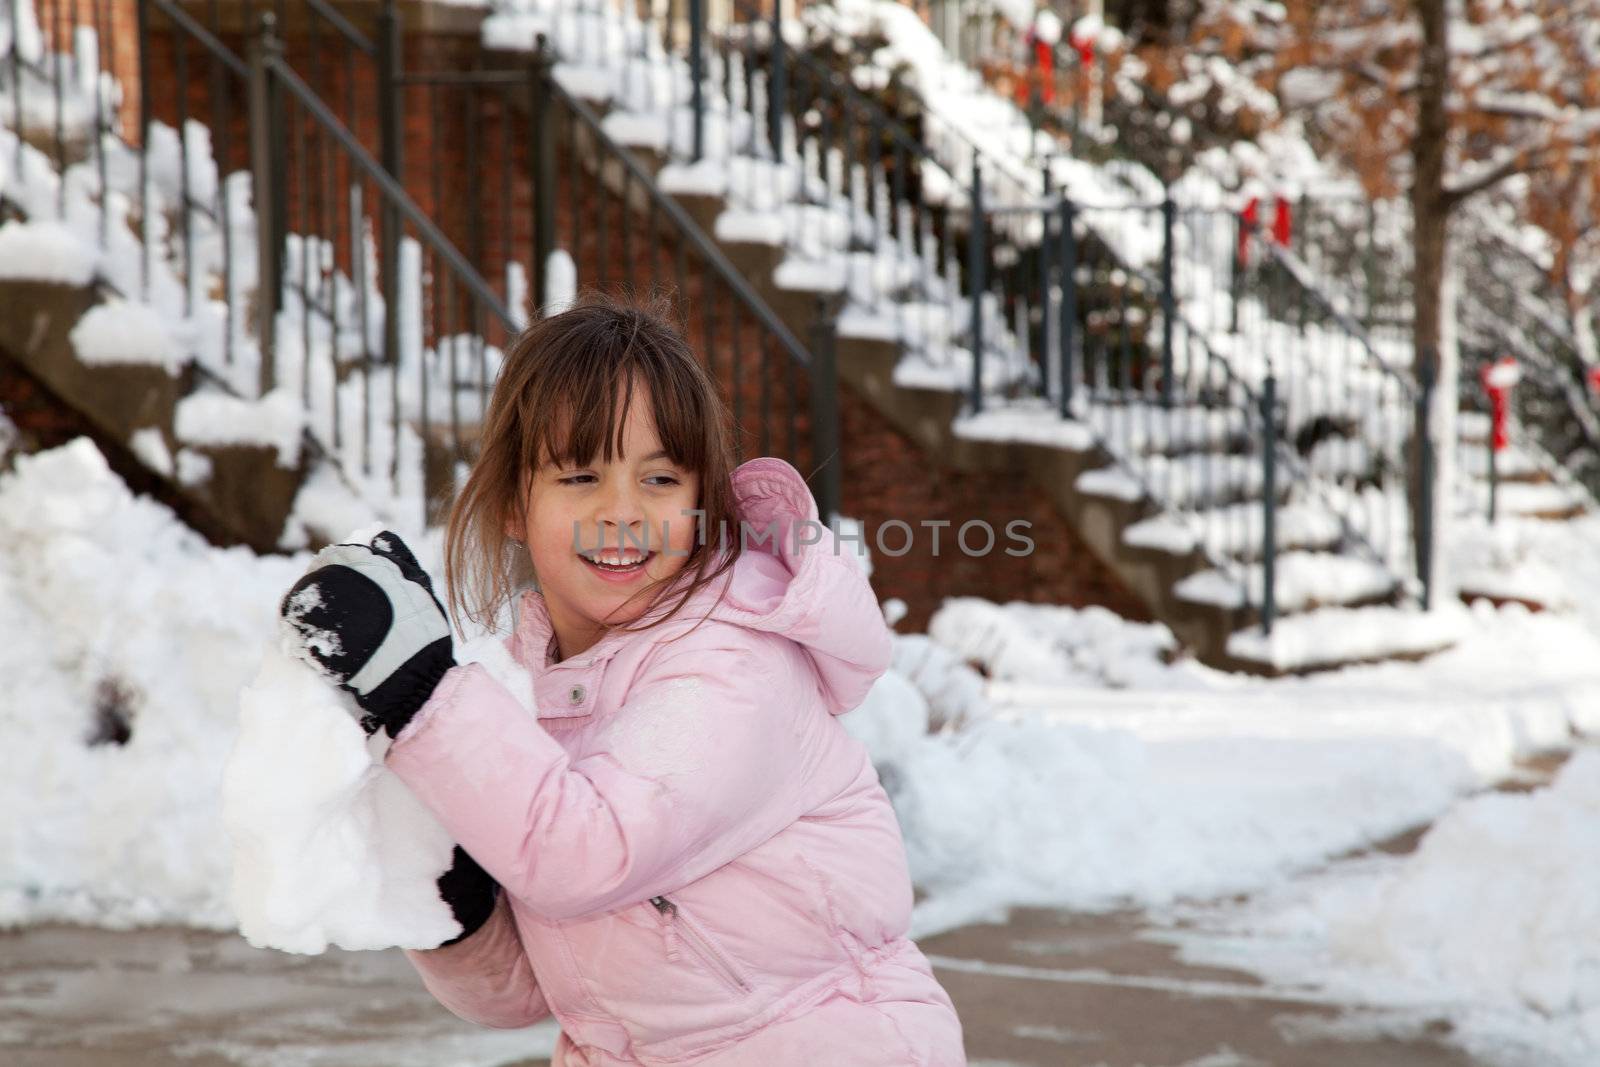 Little Girl Throwing a Giant Snow Ball by DashaRosato